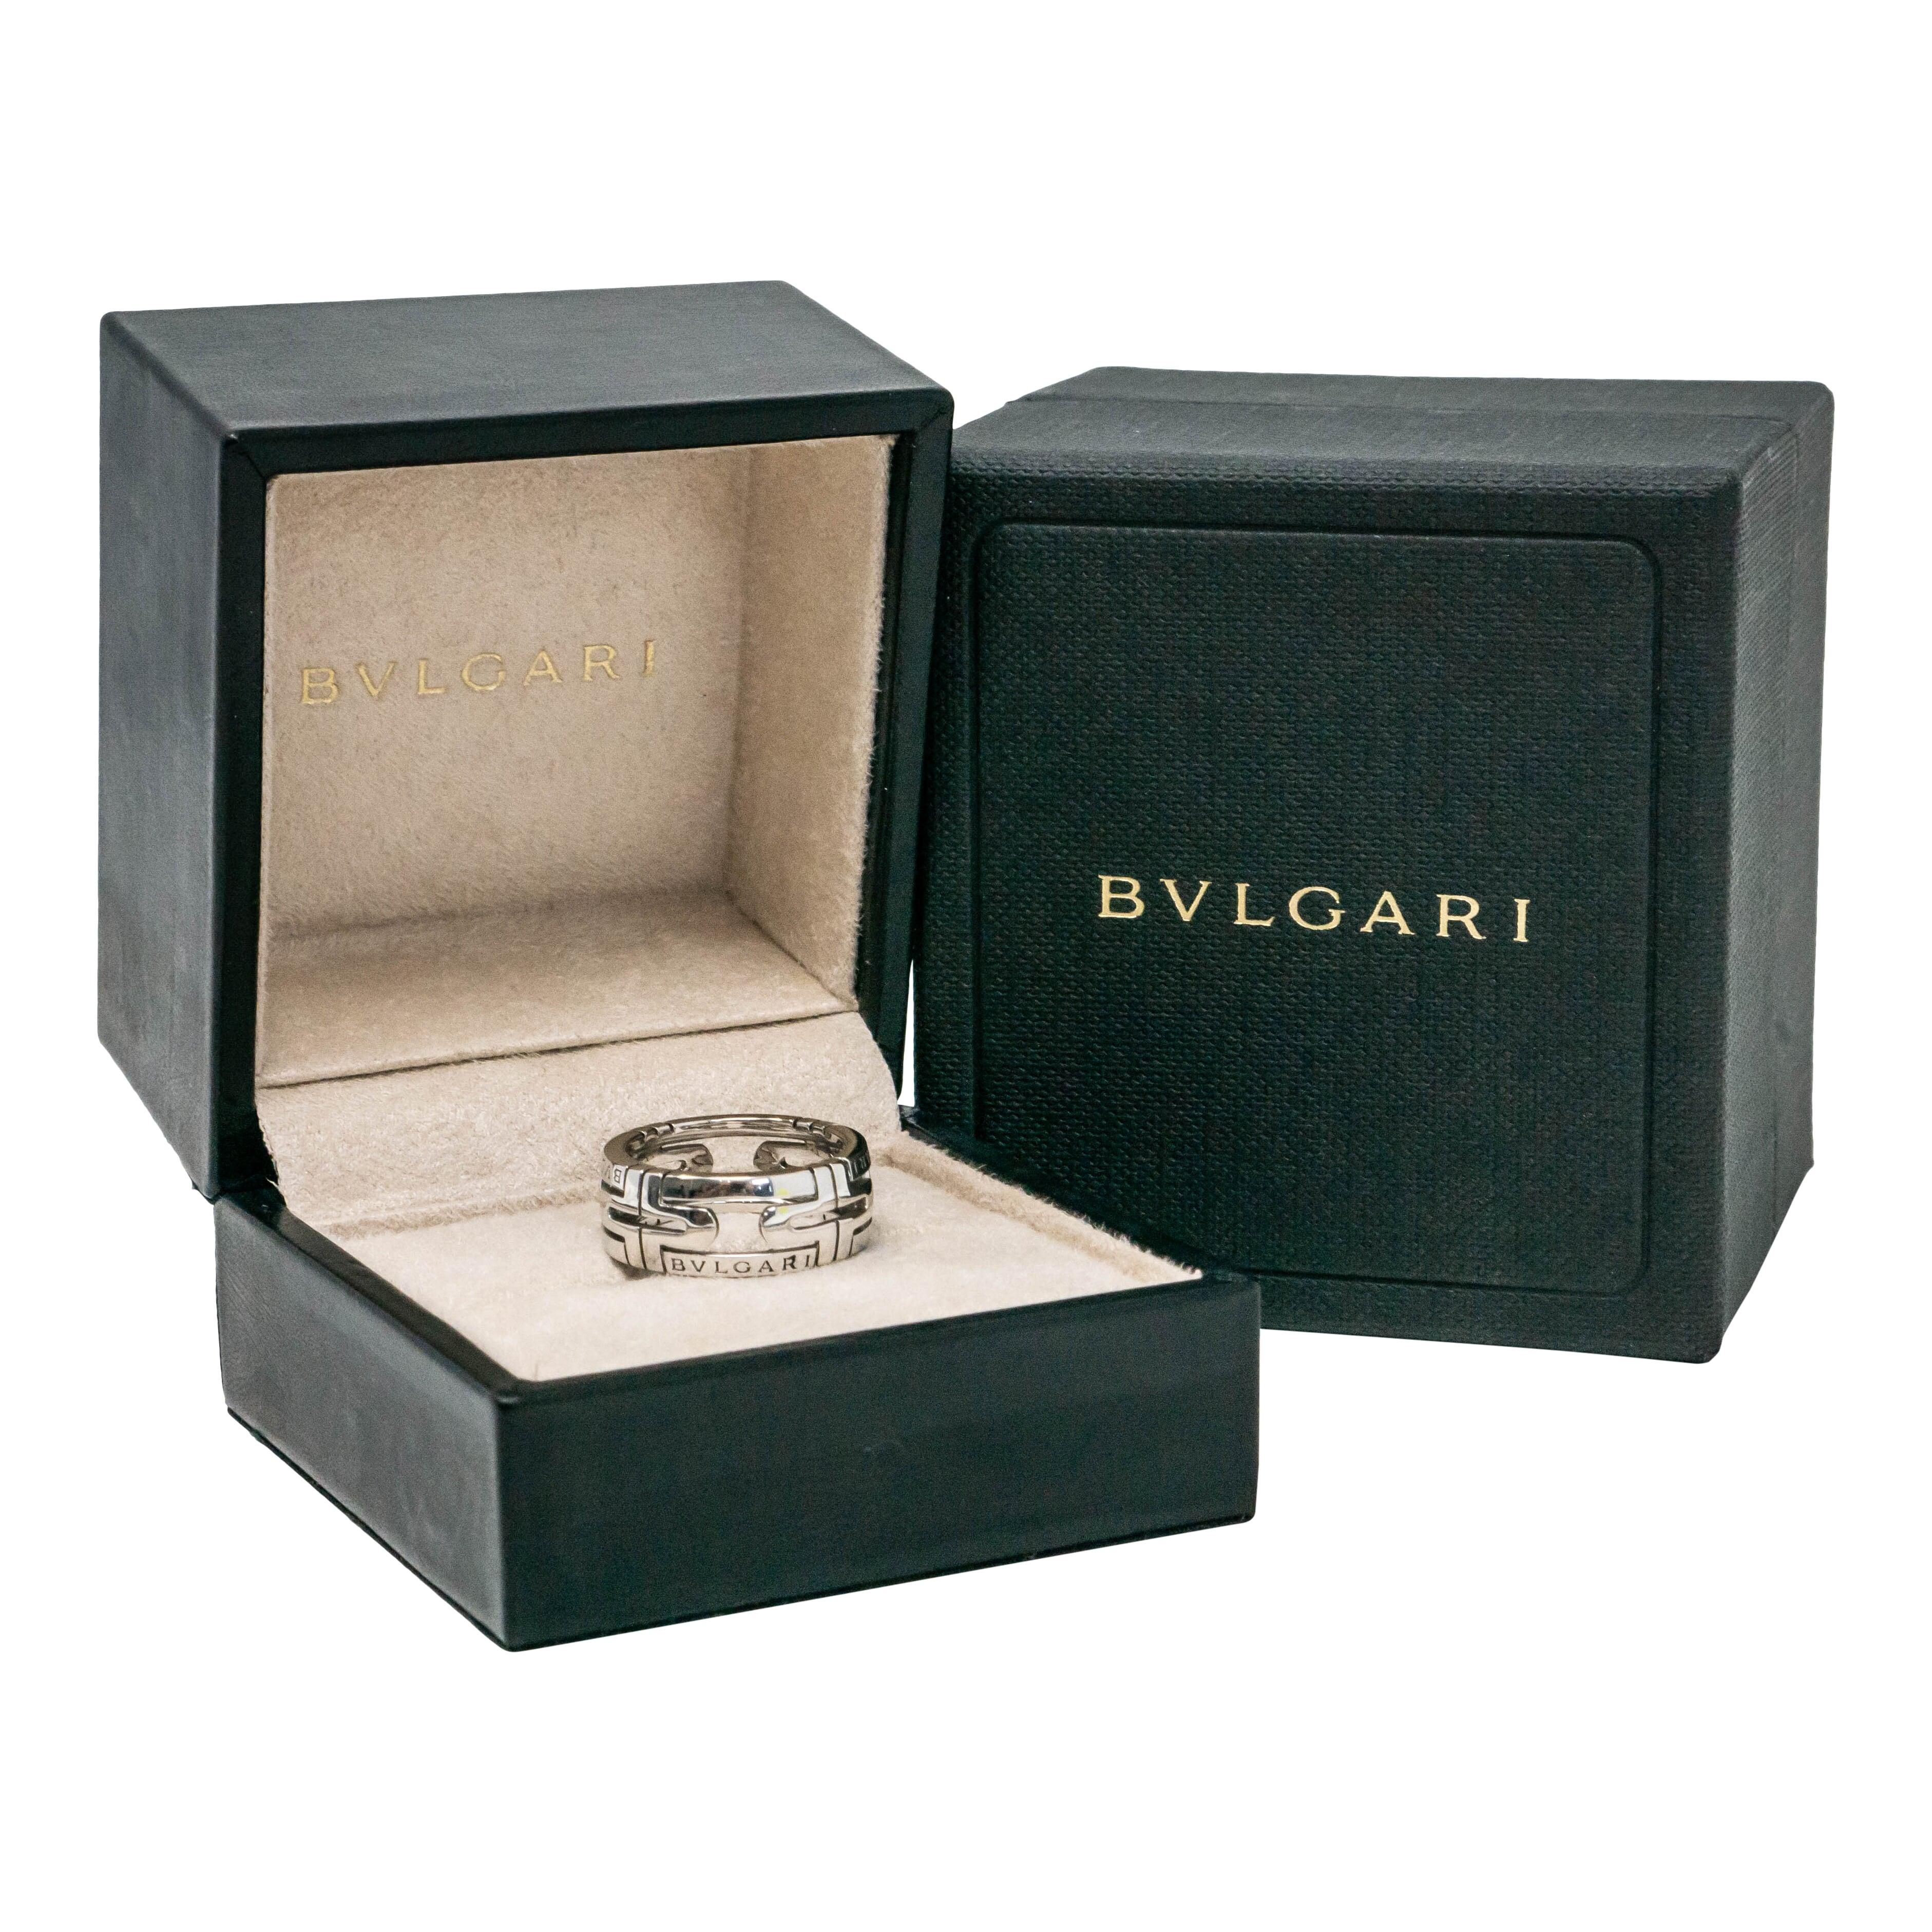 Bvlgari White Gold Ring In Excellent Condition For Sale In Miami, FL